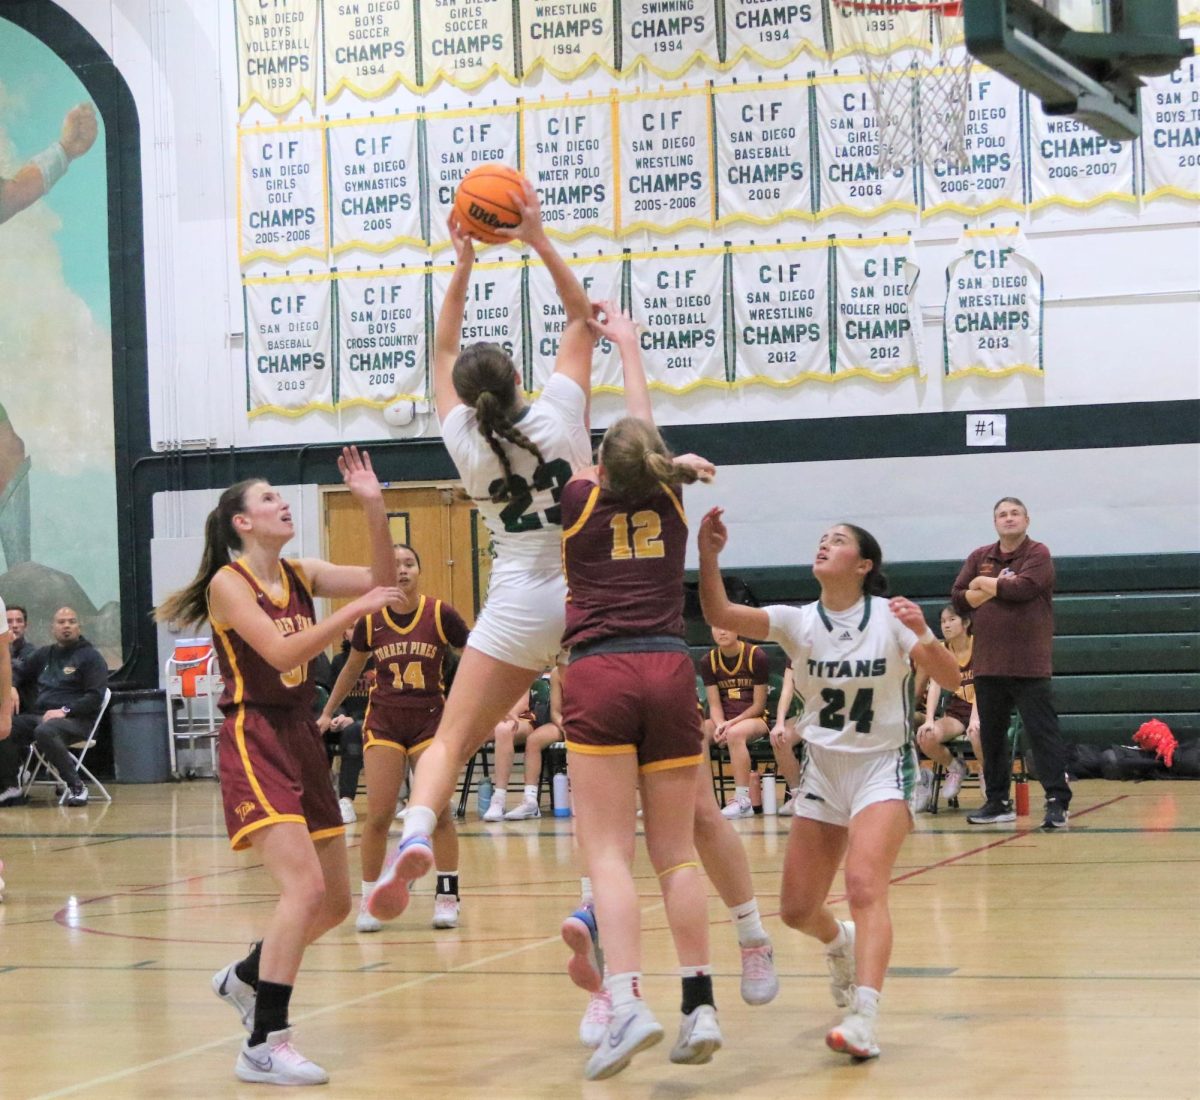 Going for the basket: Junior Katelyn Johnson leaps to put the ball through the hoop, during a home game against Torrey Pines Dec. 12, as her senior teammate Teya White waits to catch a potential rebound.